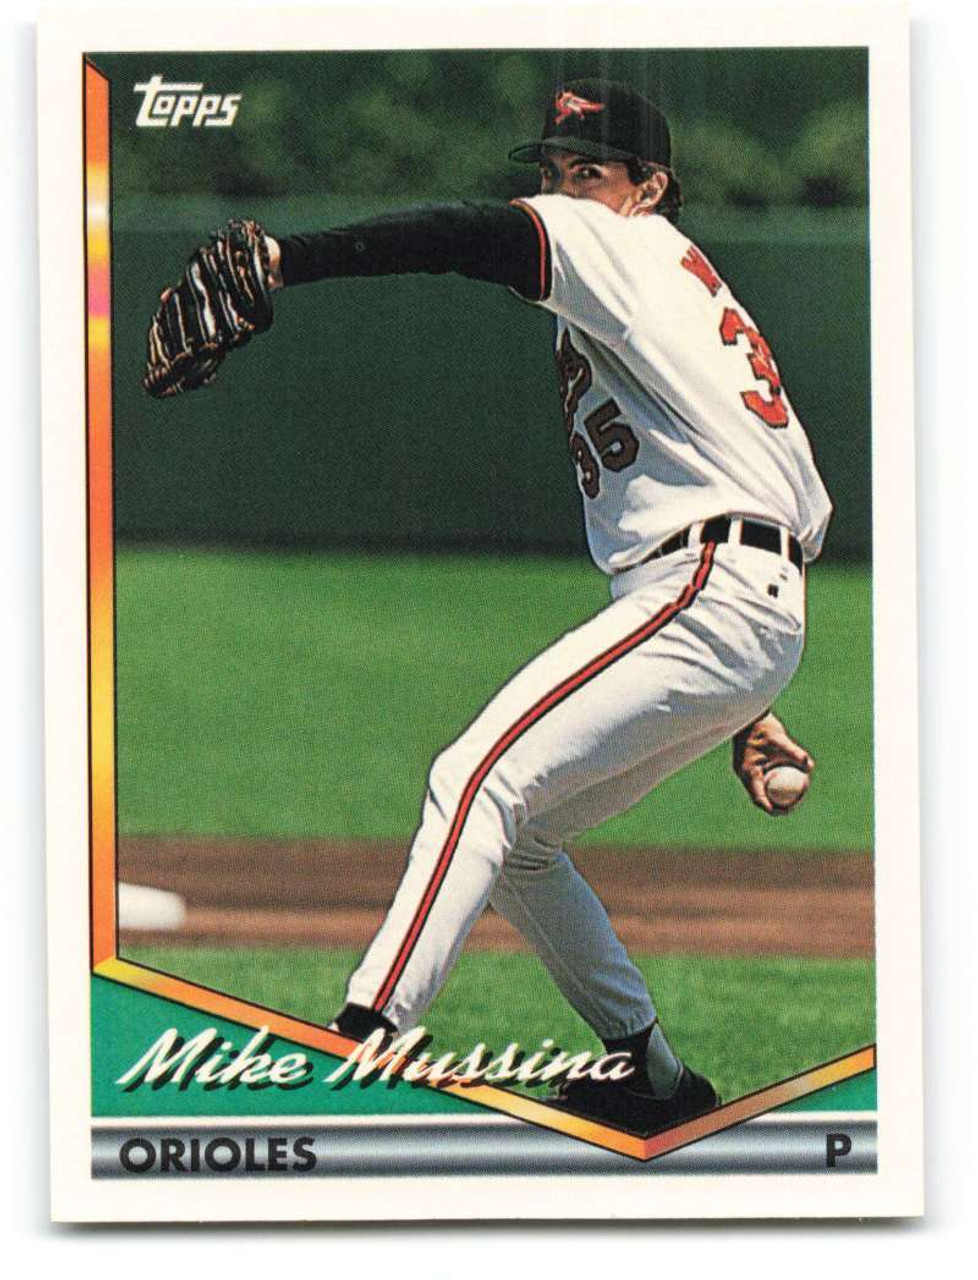 1994 Topps #598 Mike Mussina VG Baltimore Orioles - Under the